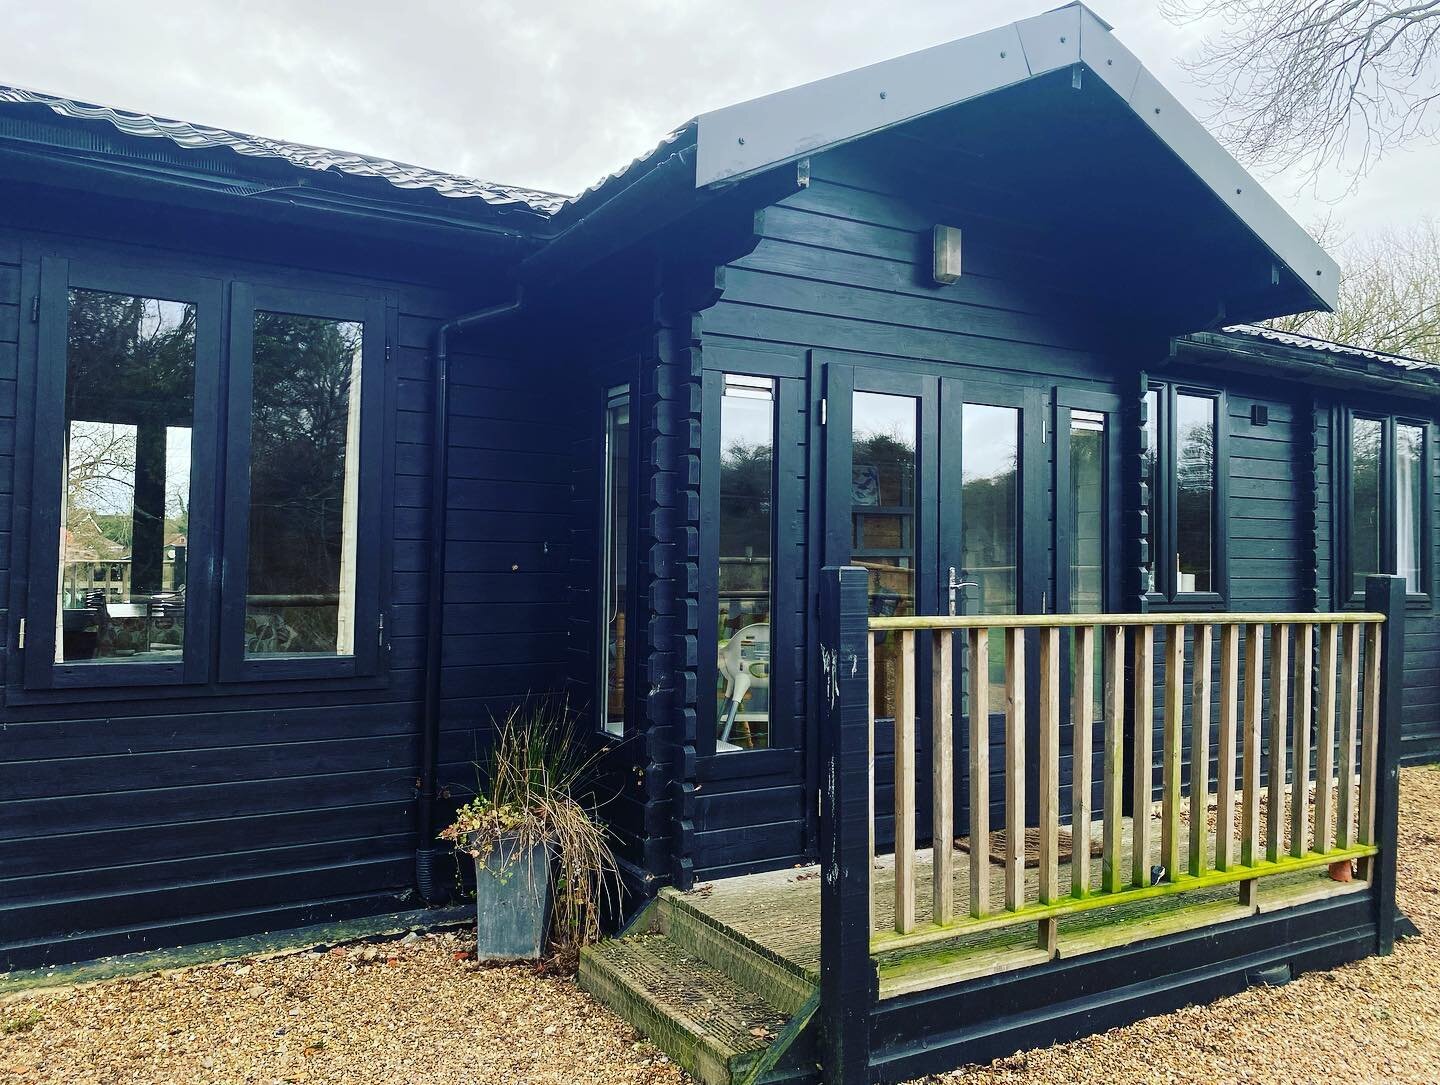 We are so proud of our cosy Garden Lodge. 🪴

It was lovely and toasty warm when I took these photos - all ready to welcome our next guests! 🥰

#norfolkstays #families #familytime #dogswelcome #dogfriendly #bnb #lodge #selfcatering #selfcatered #nor